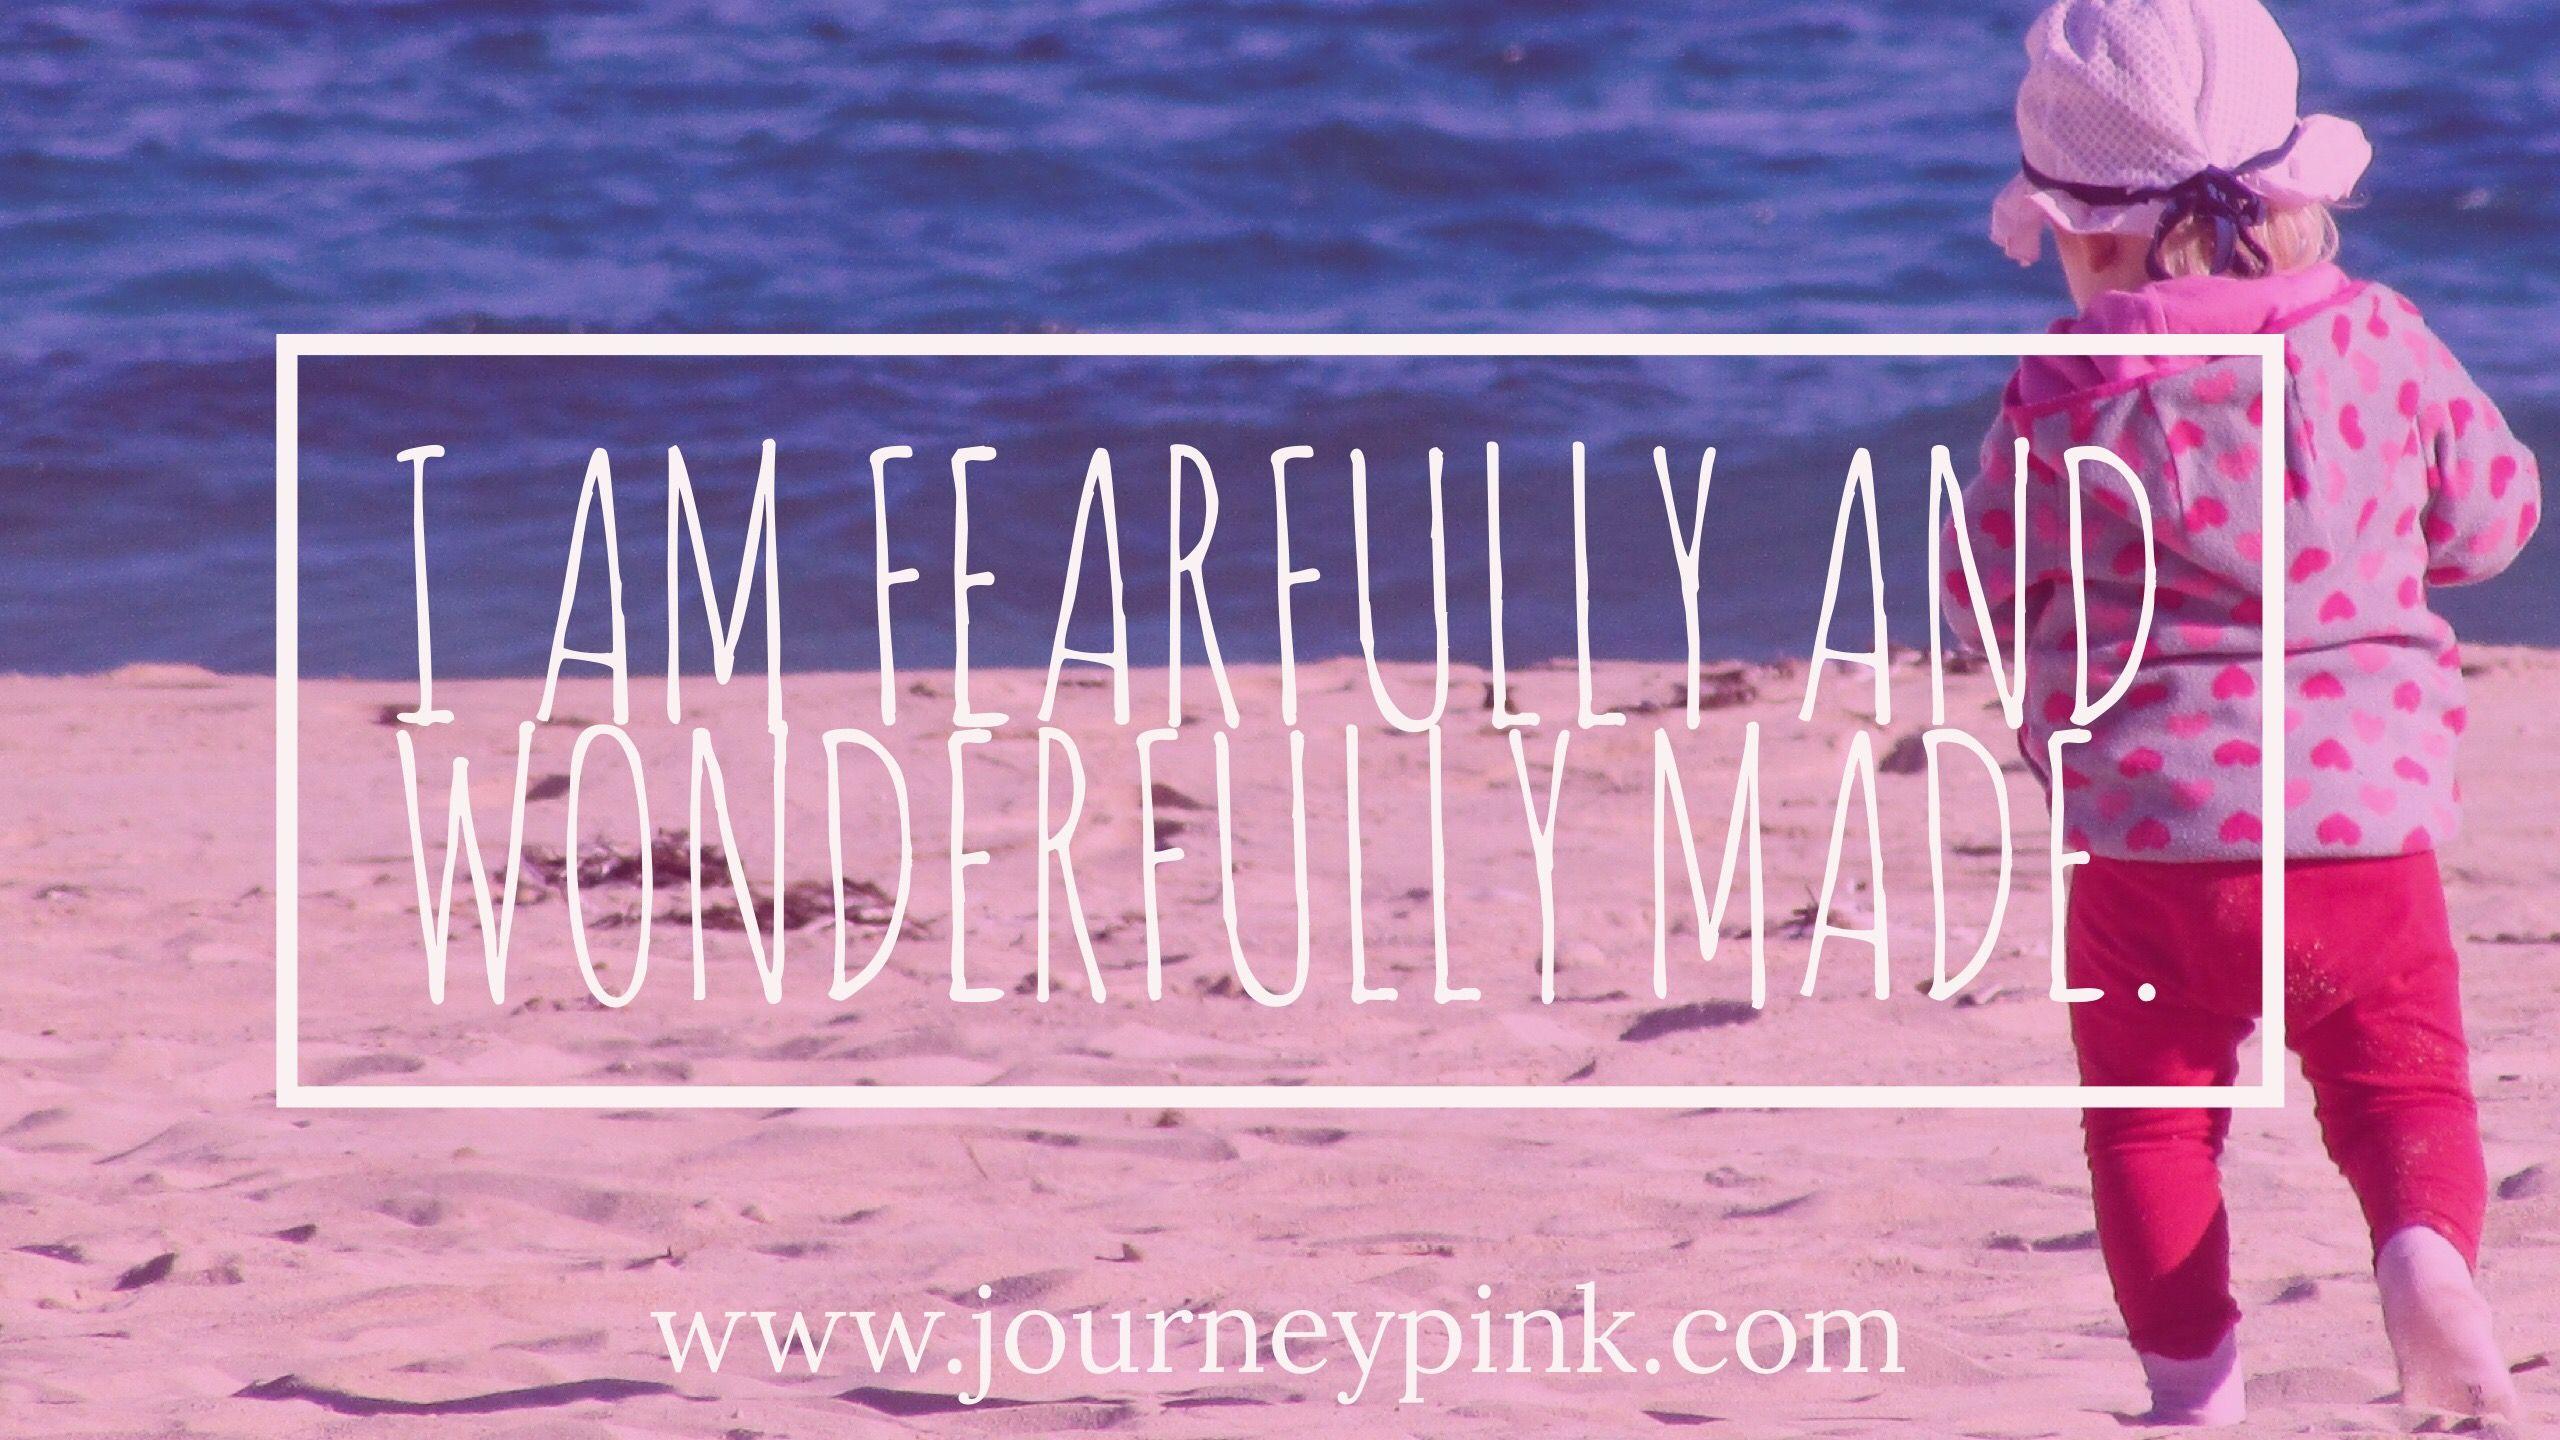 Days of Truth: I am fearfully and wonderfully made